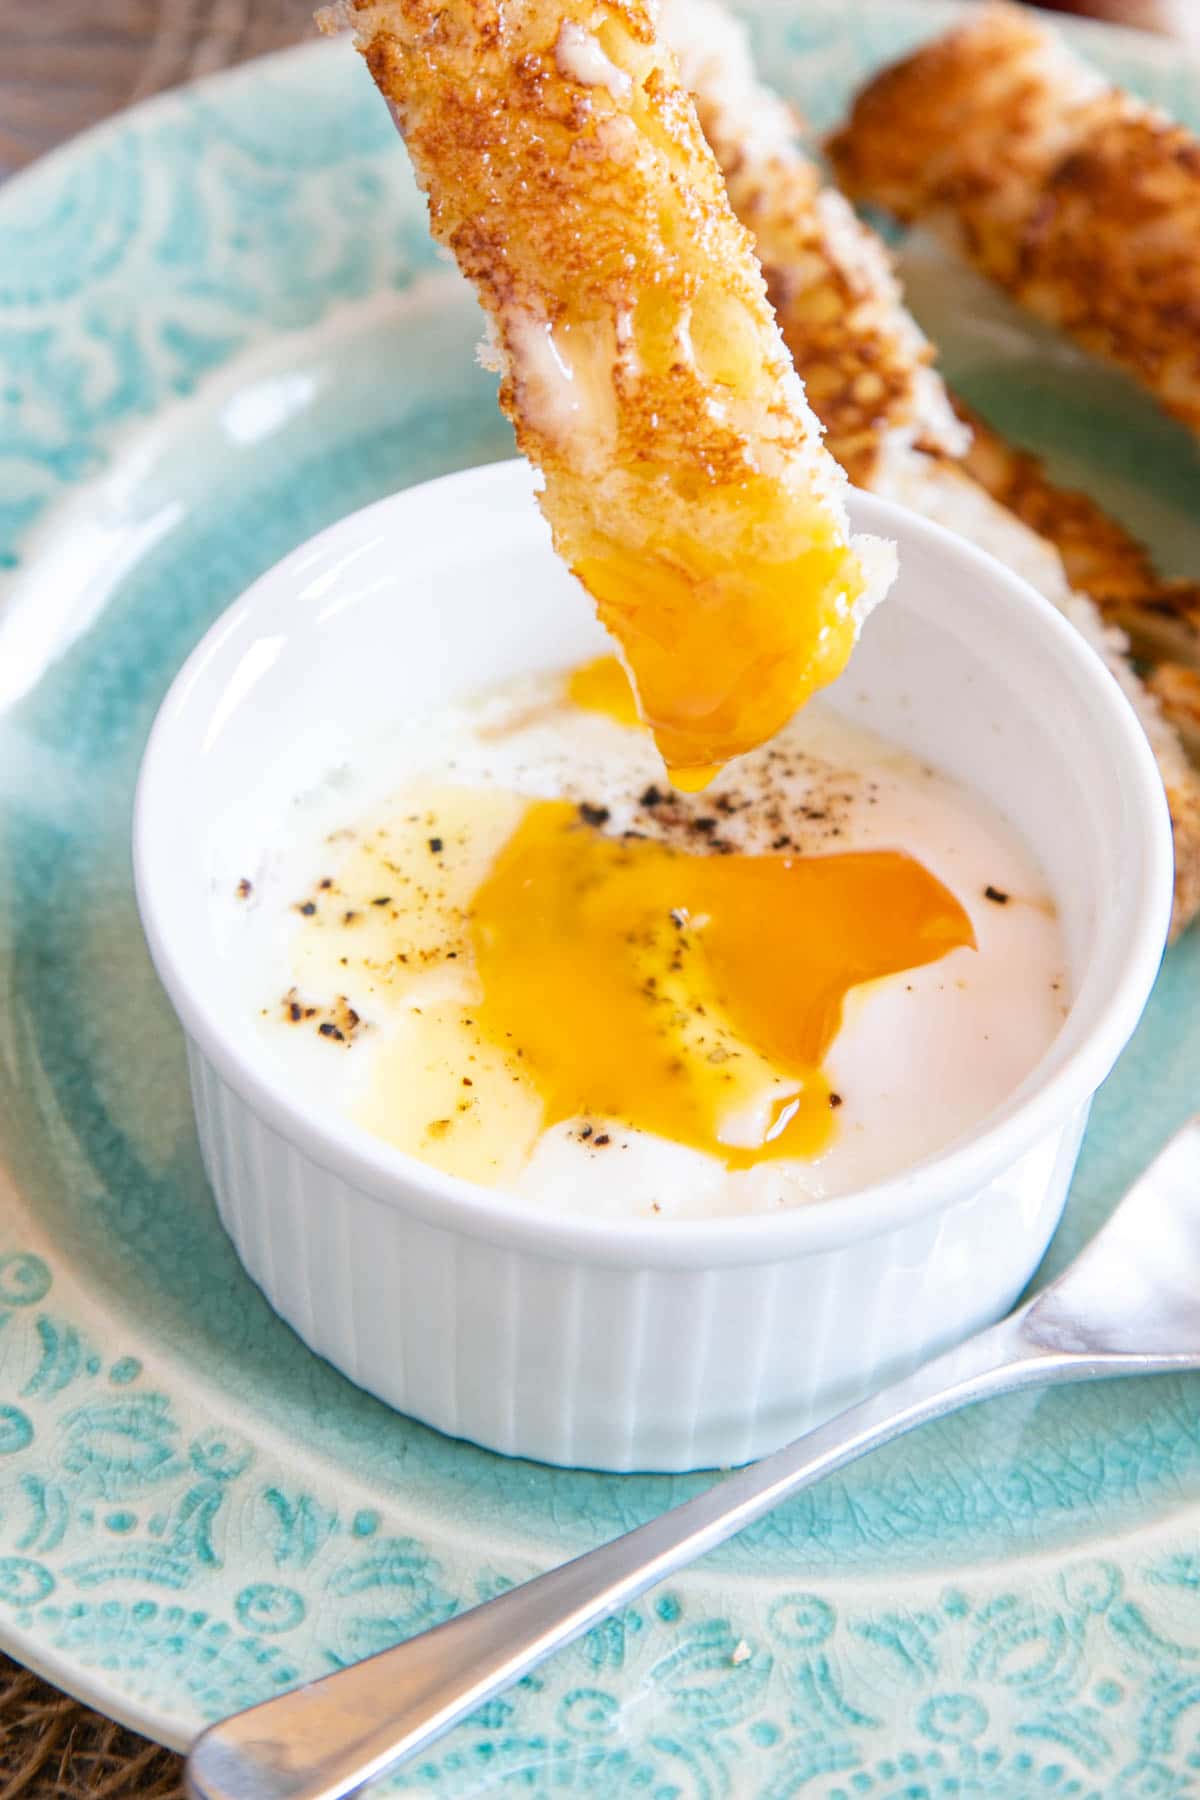 Dipping in to the golden yolk of a coddled egg in a ramekin dish